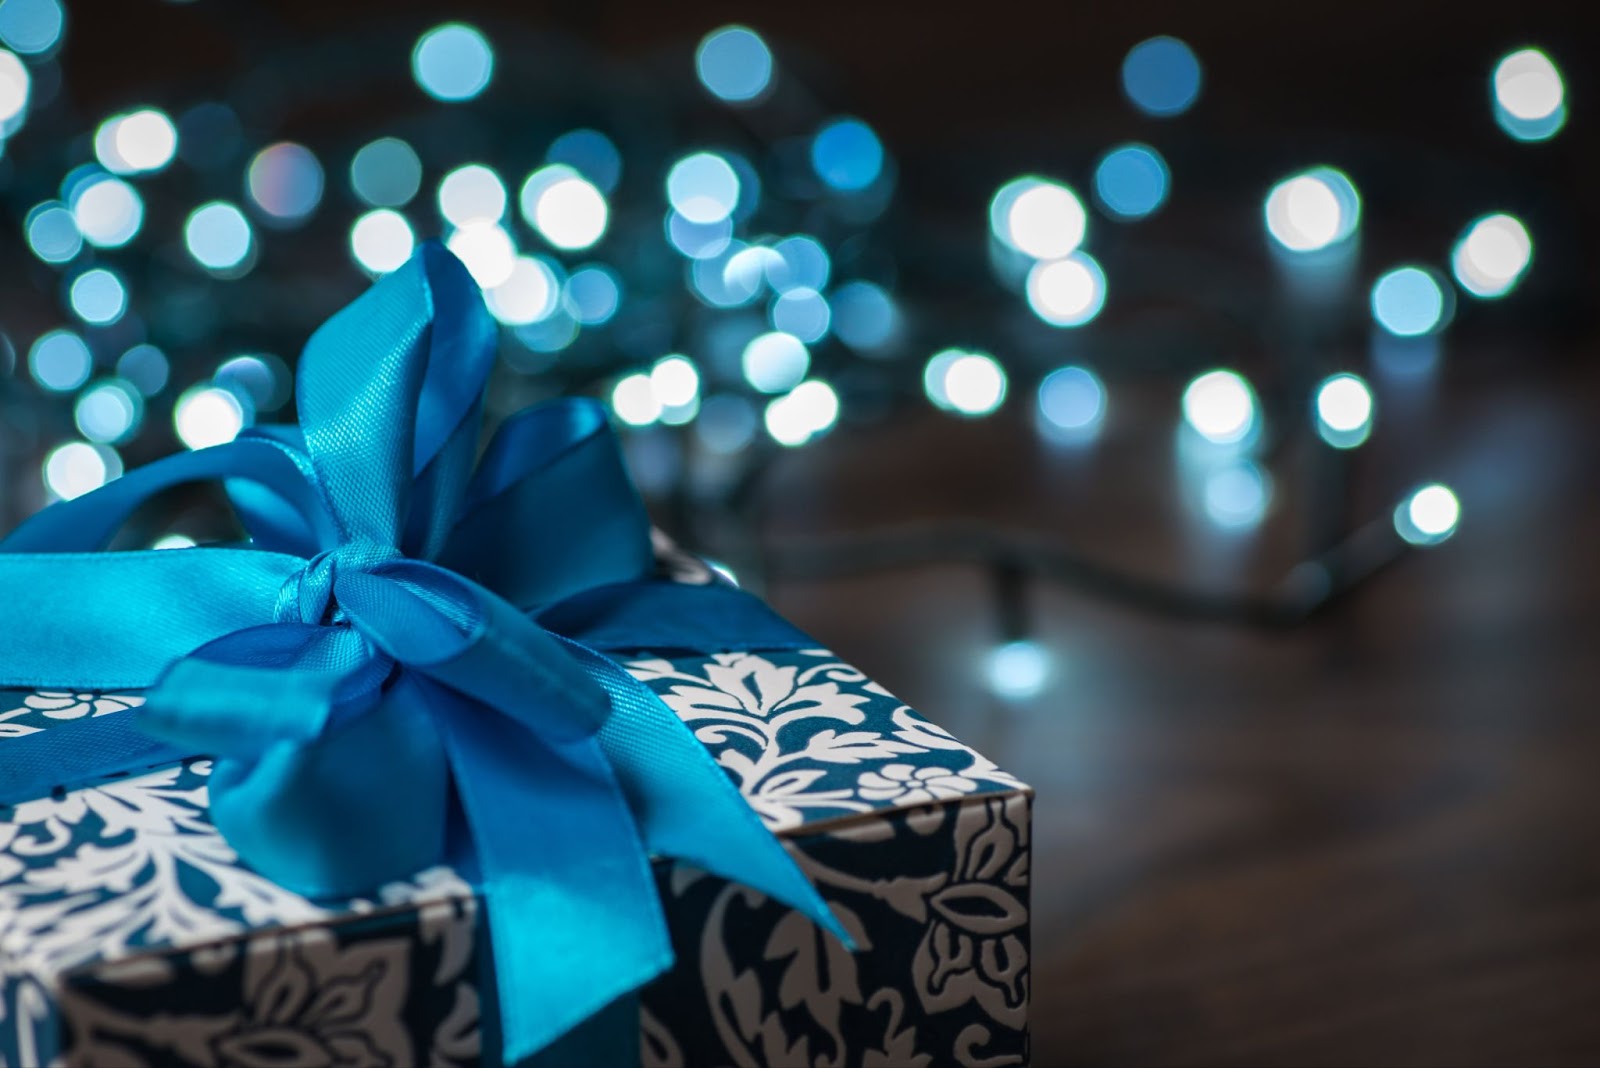 Blue Christmas lights with box gift wrapped in a bow